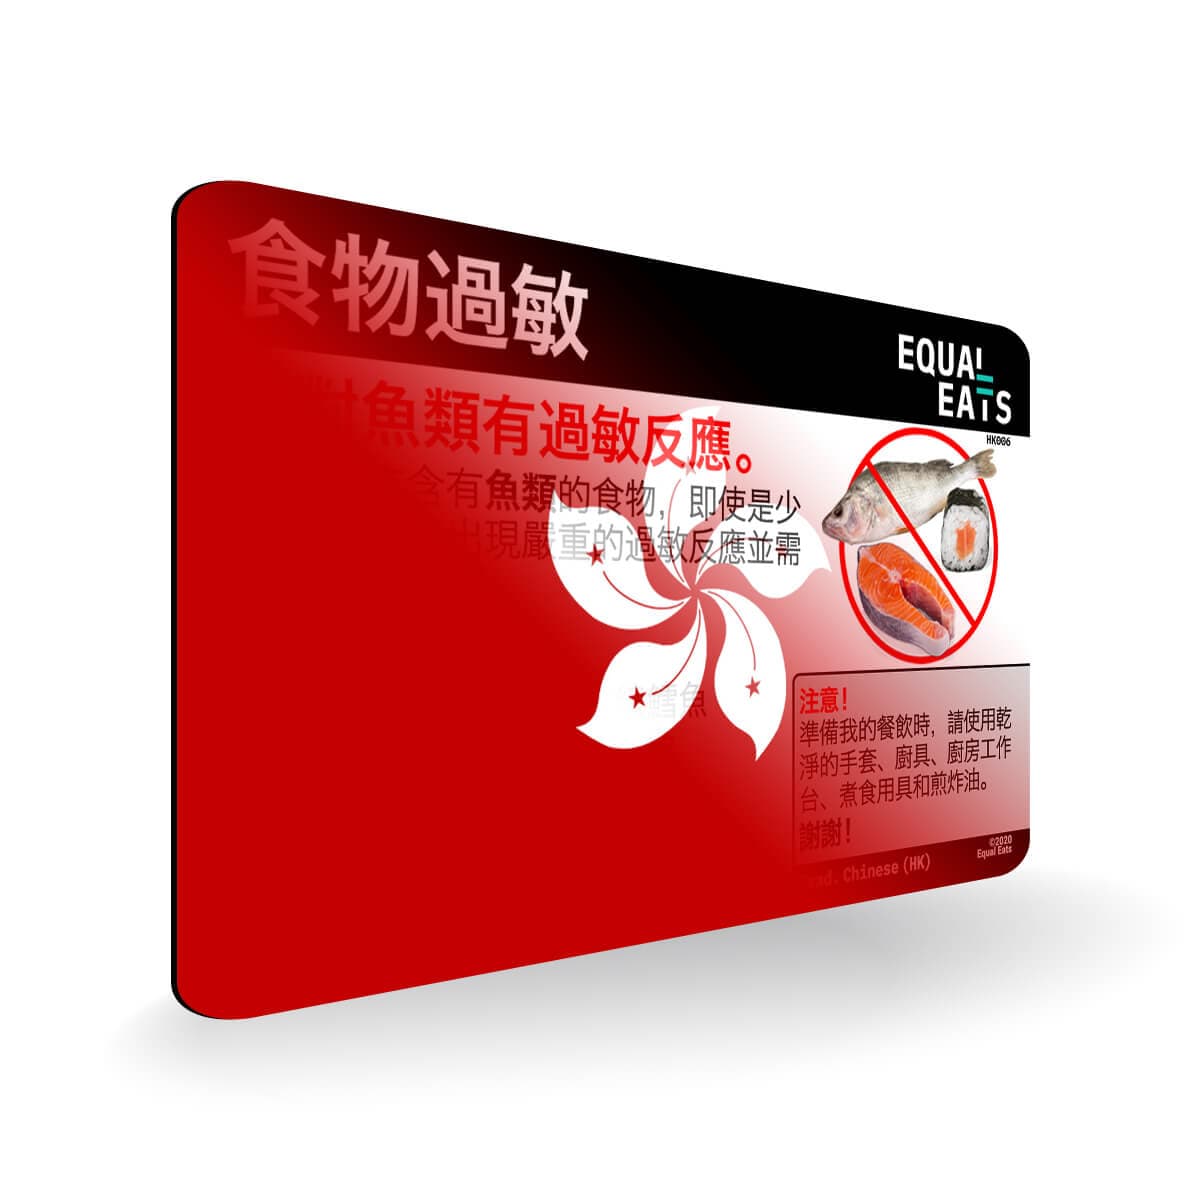 Fish Allergy in Traditional Chinese. Fish Allergy Card for Hong Kong